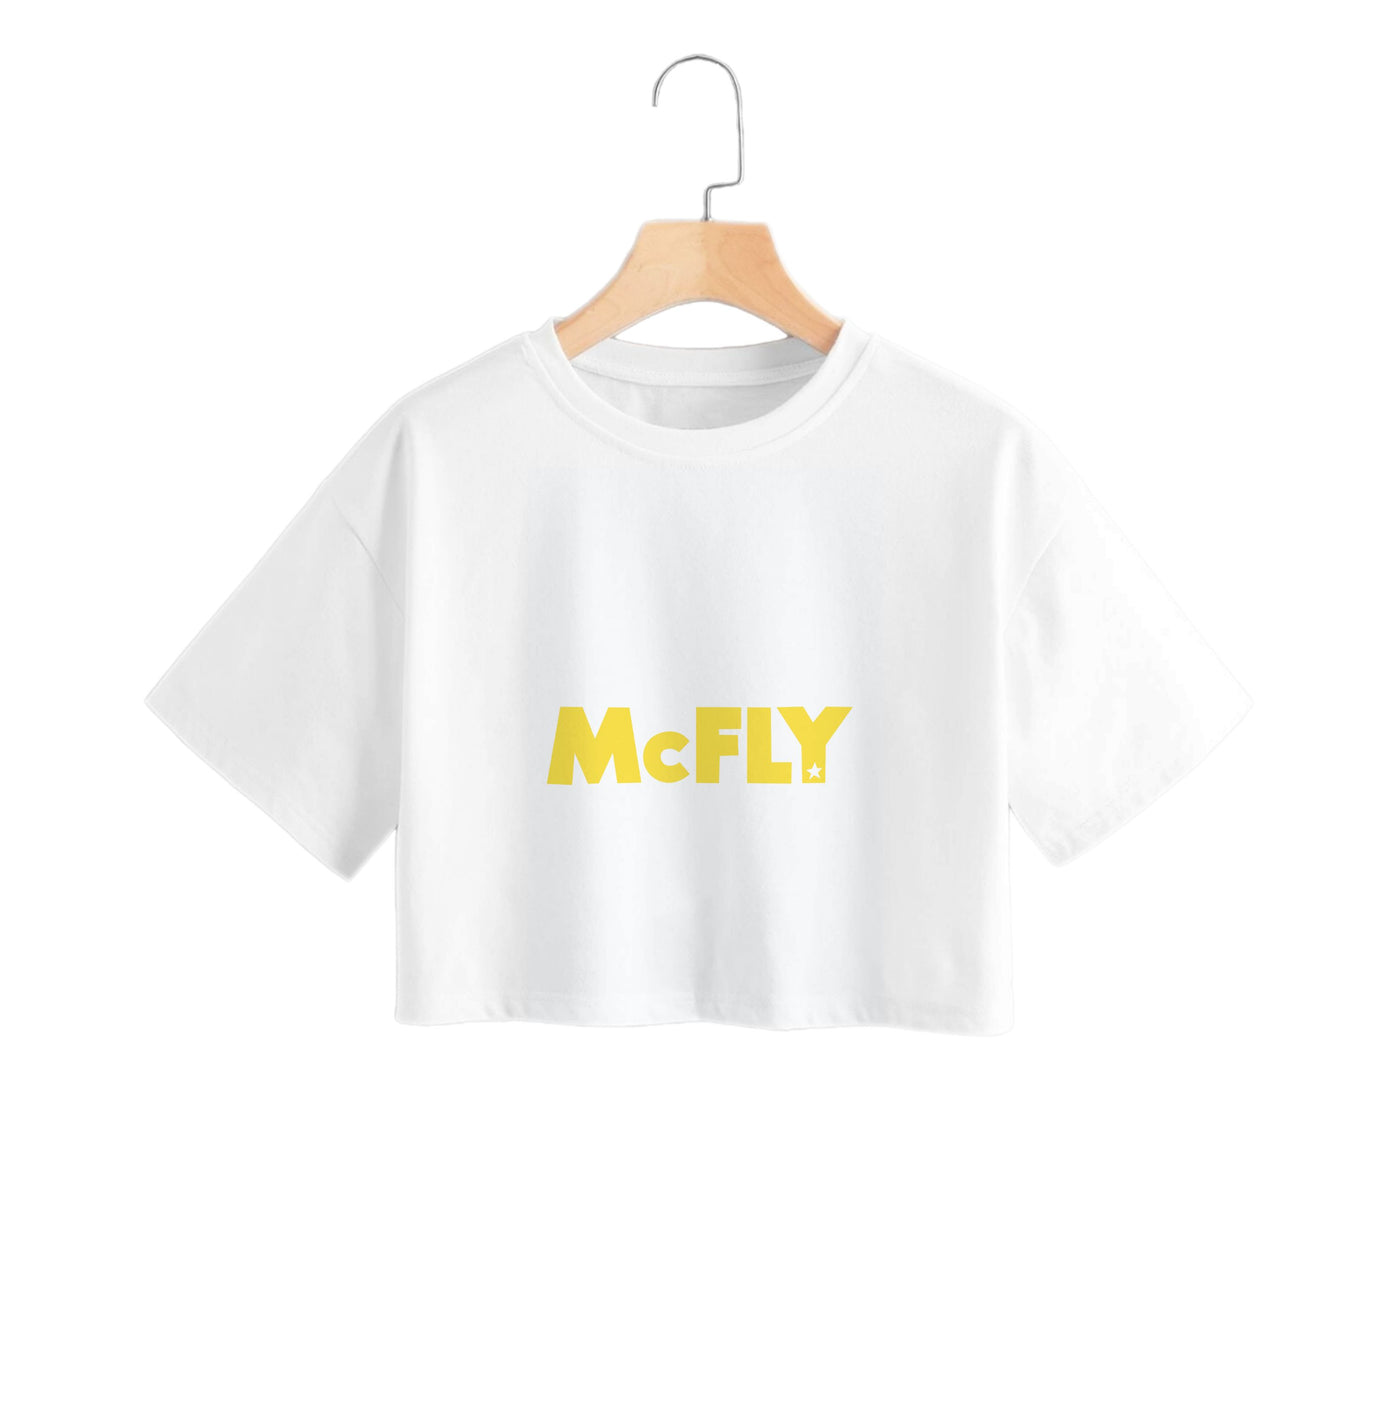 Blue And Yelllow - McFly Crop Top